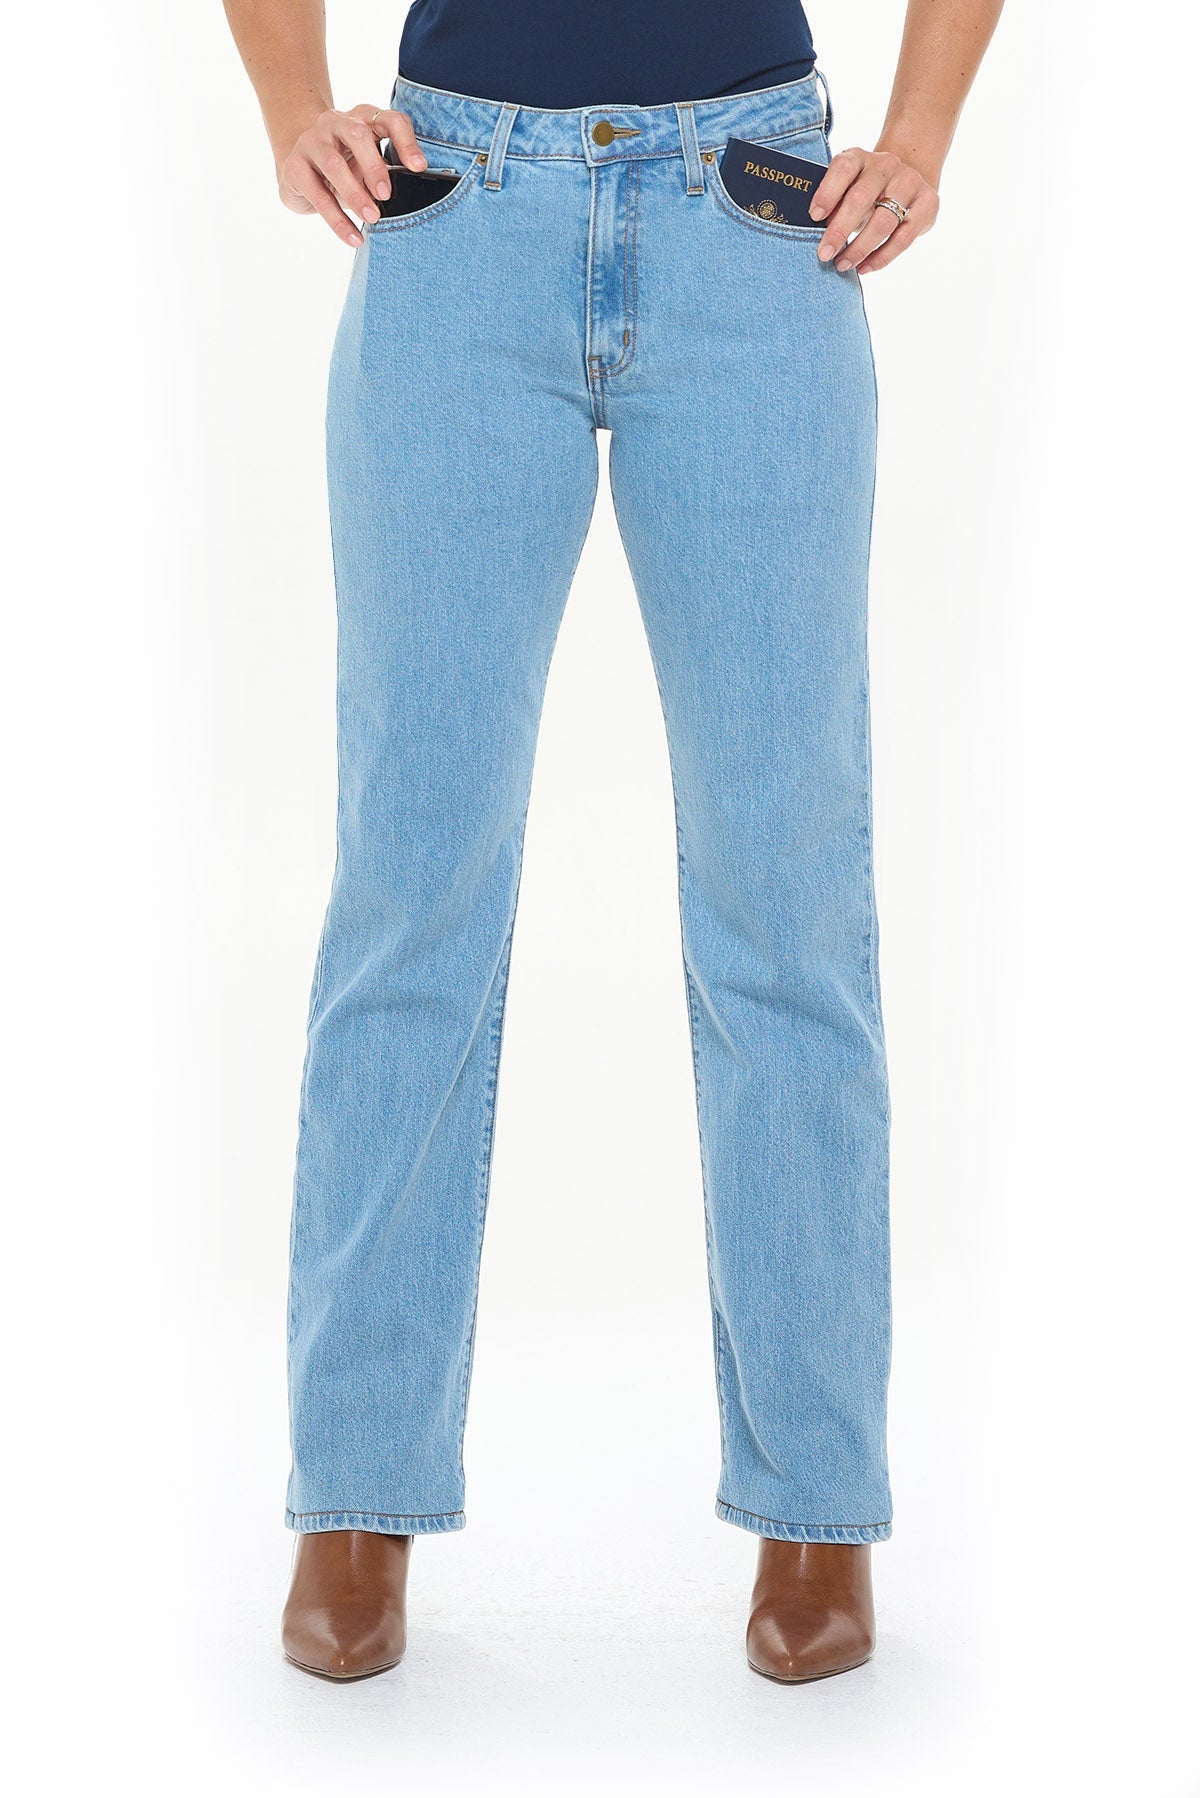 Vintage faded indigo relaxed travel jeans in the Aviator archive shop.